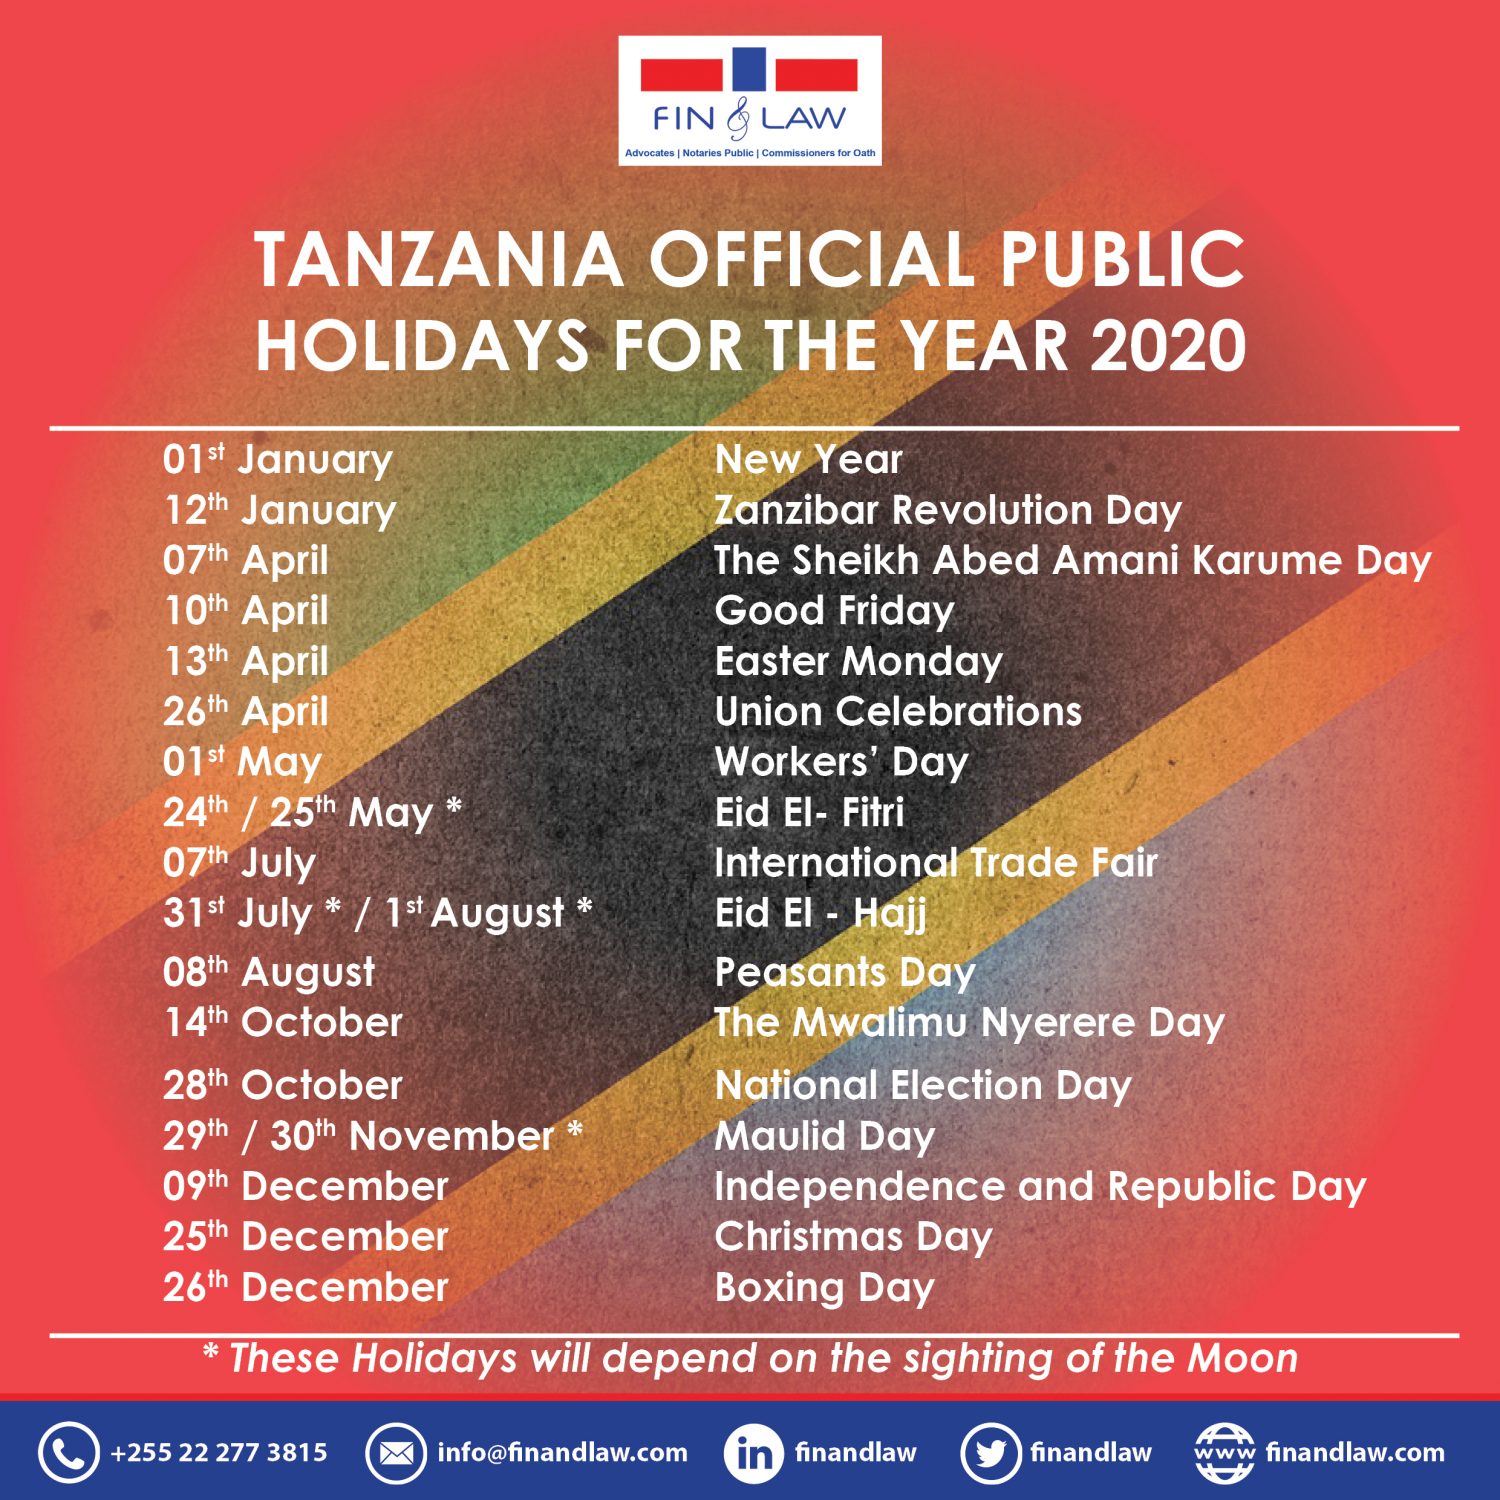 Tanzania Official Public Holidays for the year 2020 FIN & LAW